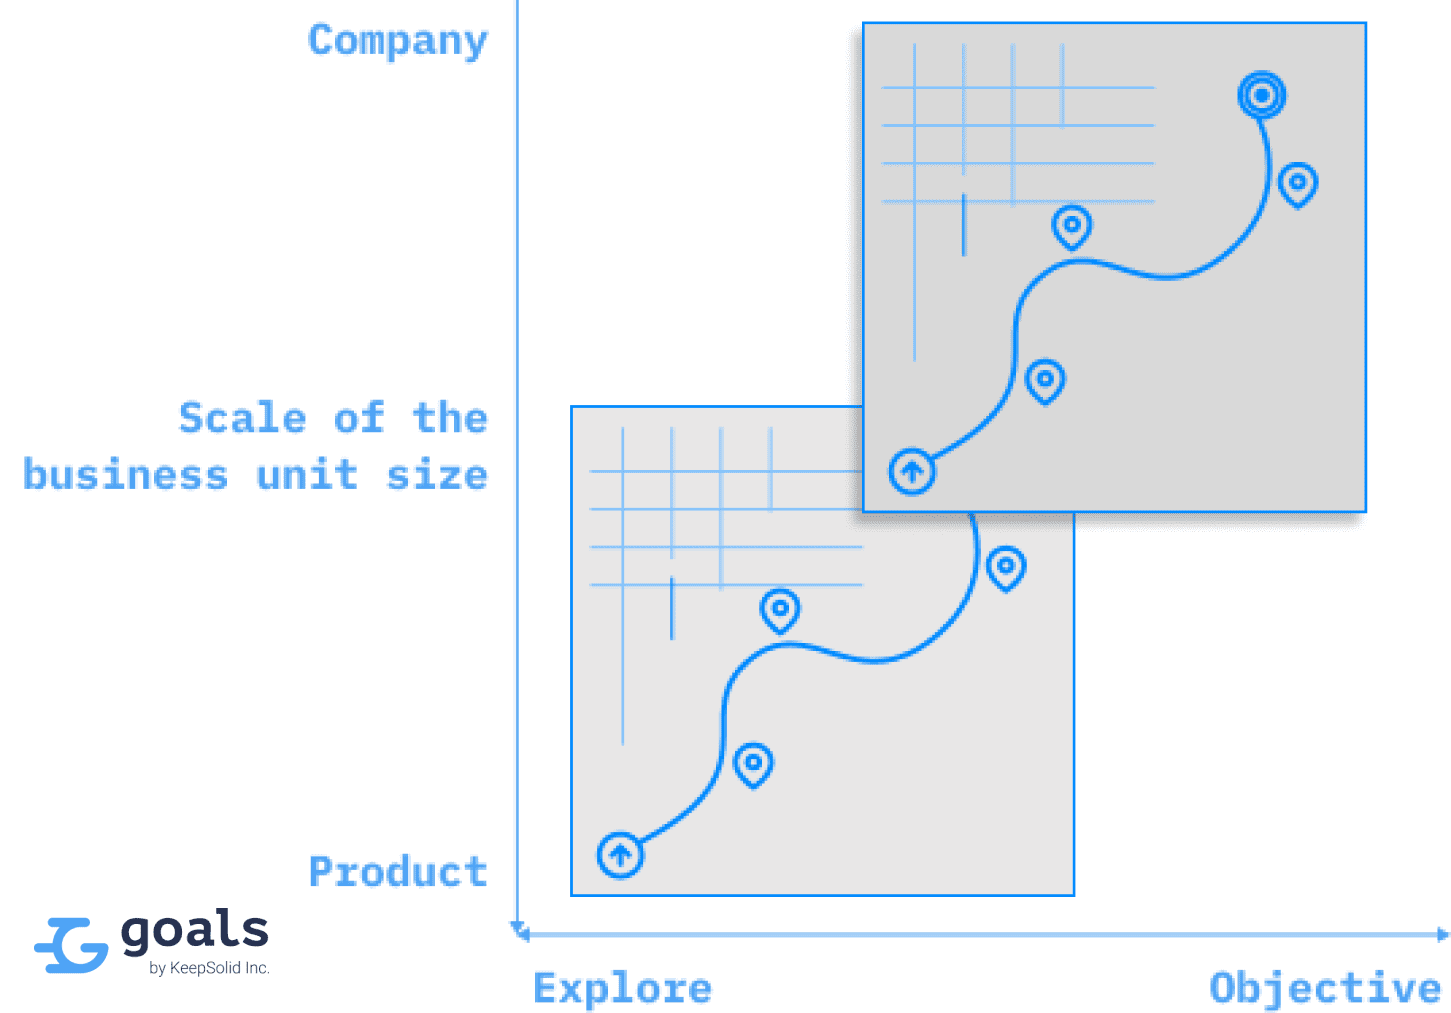 The Y-axis represents the scale of the business unit size, and the X-axis represents the type of task being solved by the map.